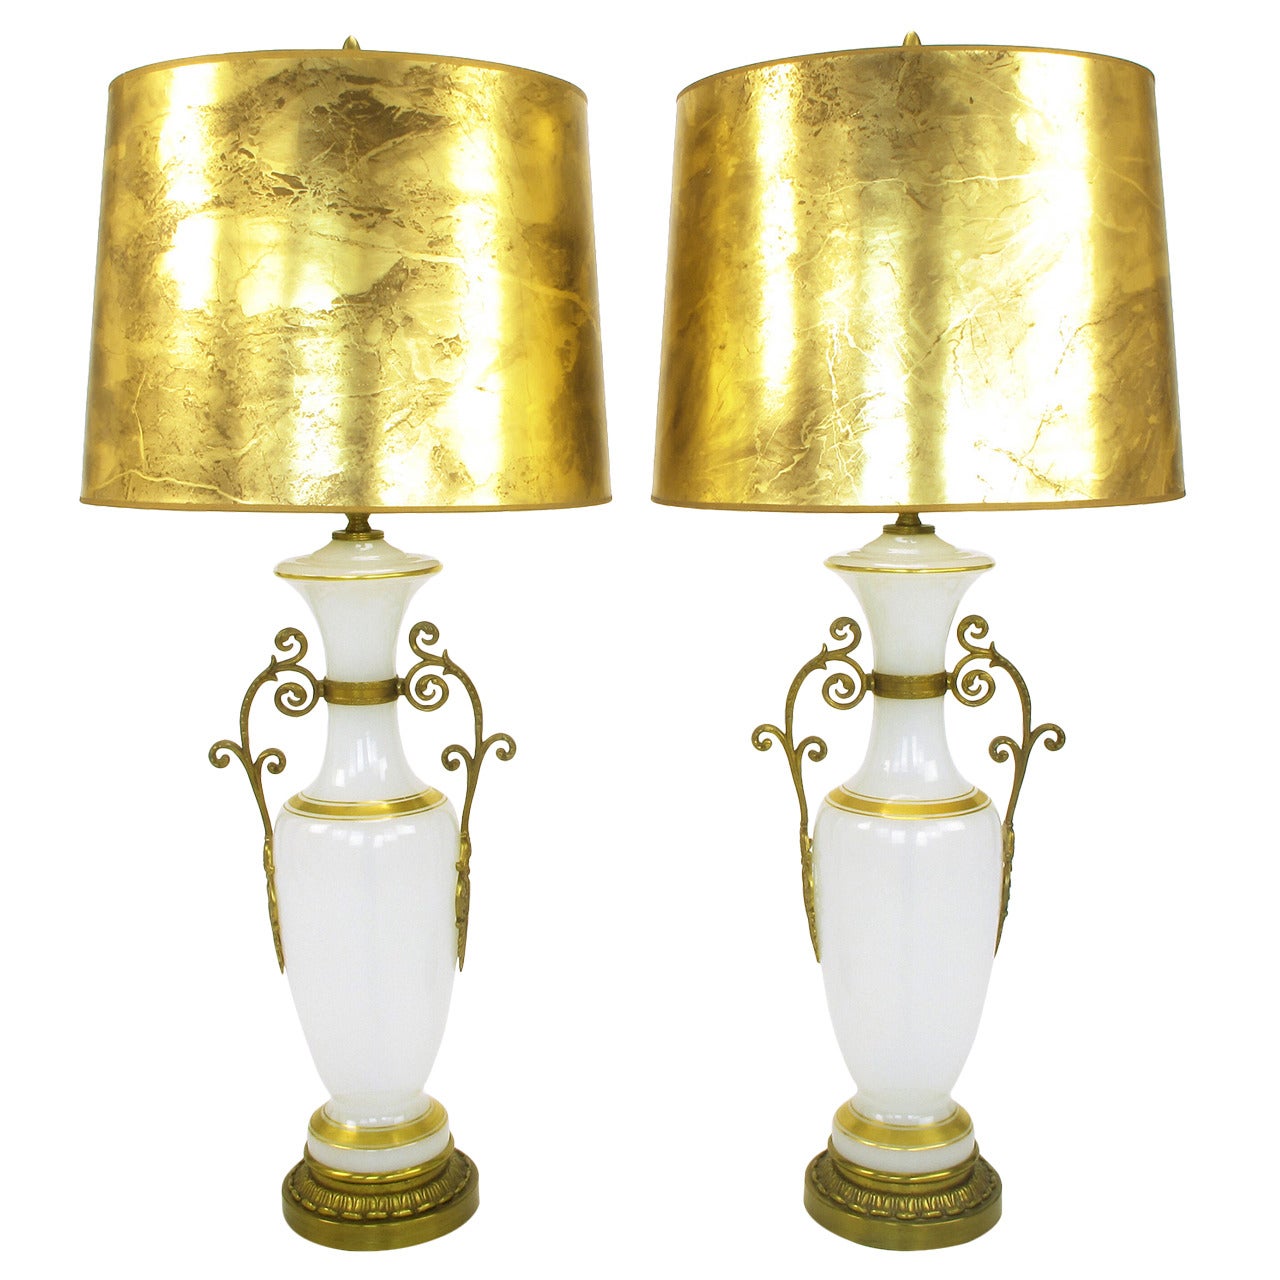 Pair of Chapman Neoclassical White Milk Glass Table Lamps with Brass Appliques